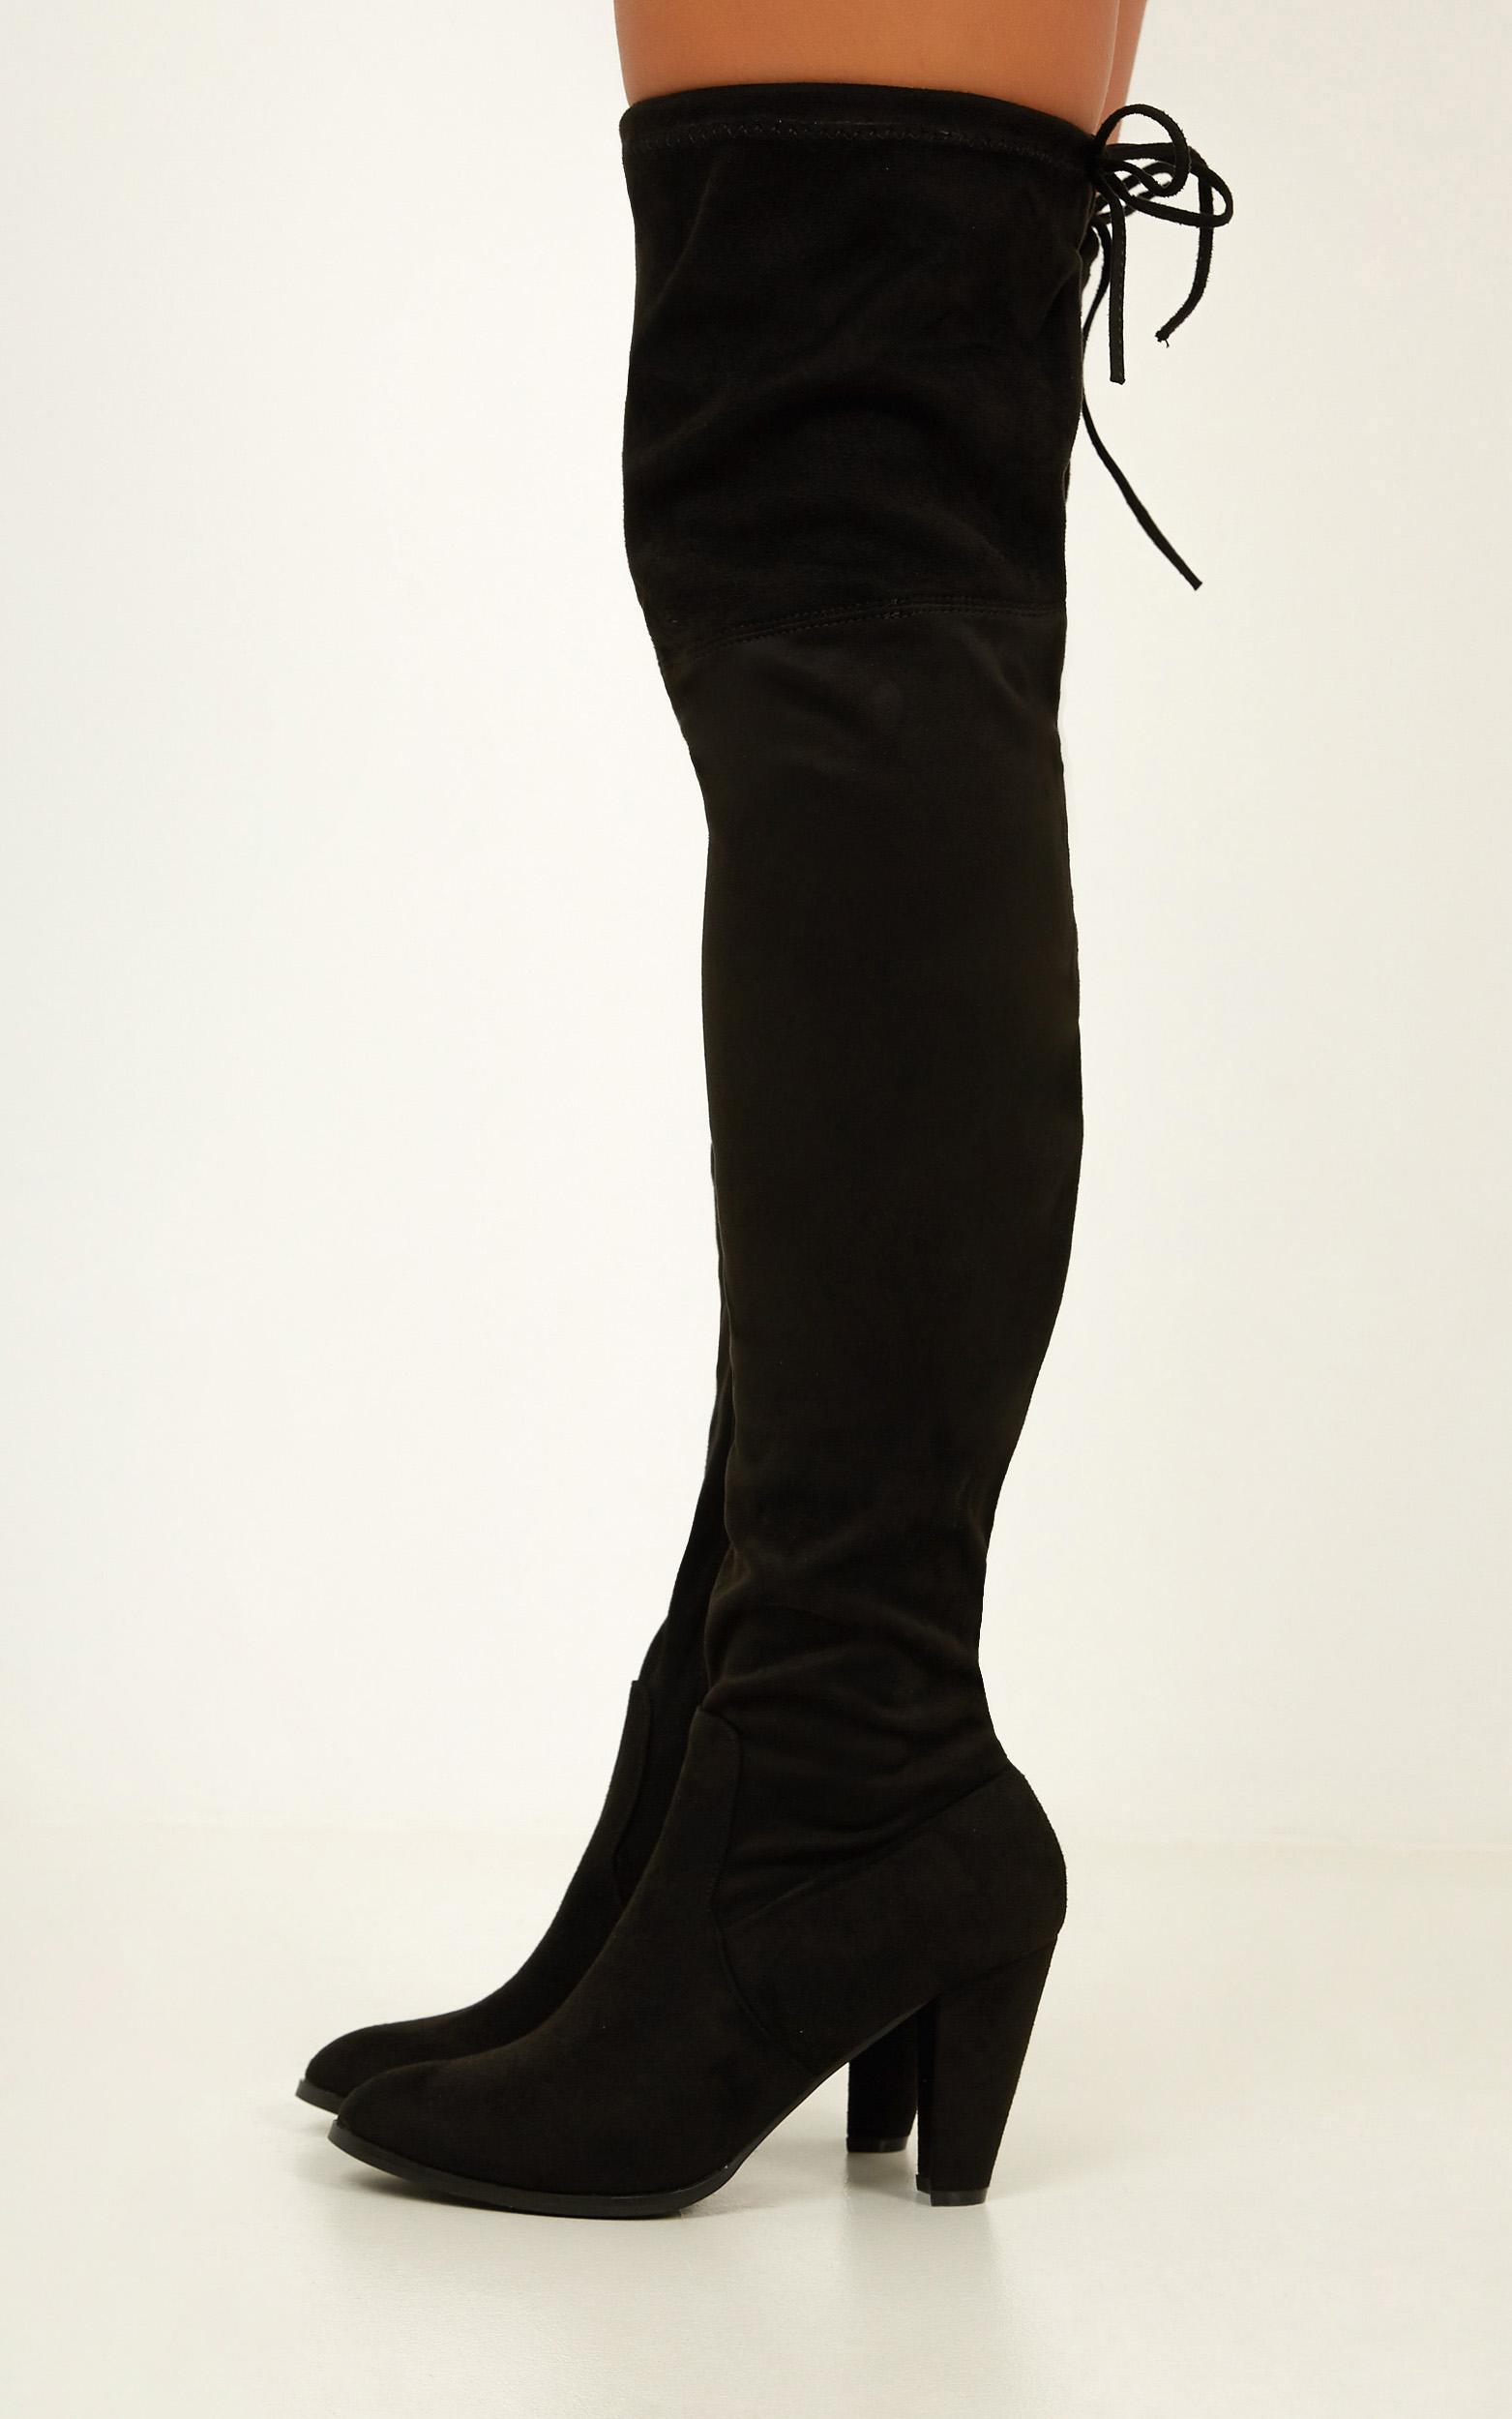 Therapy Shoes - Ambrose Boots in Black Micro | Showpo